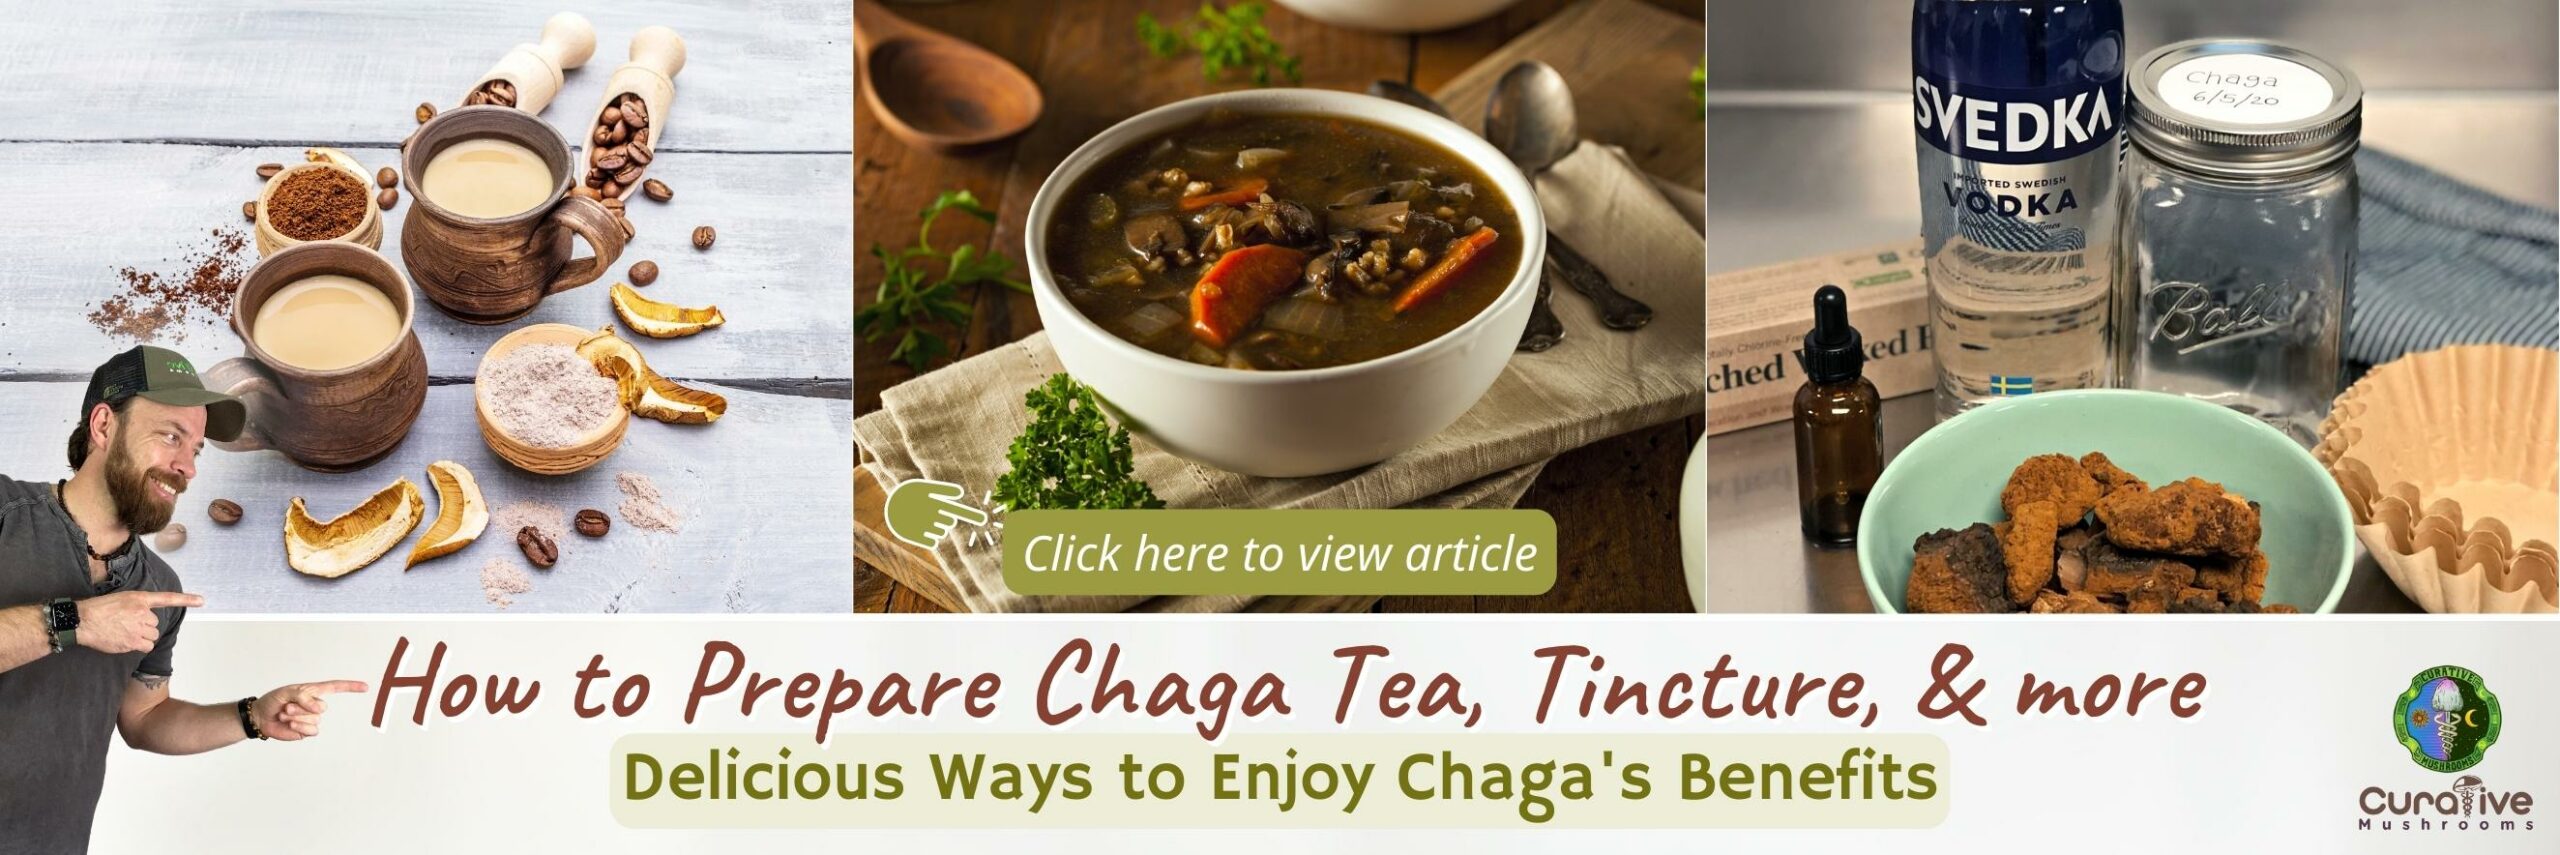 Delicious Ways to Enjoy Chaga's Benefits How to Prepare Chaga Tea, Tincture, and more - Delicious Ways to Enjoy Chaga's Benefits - Click here to view article